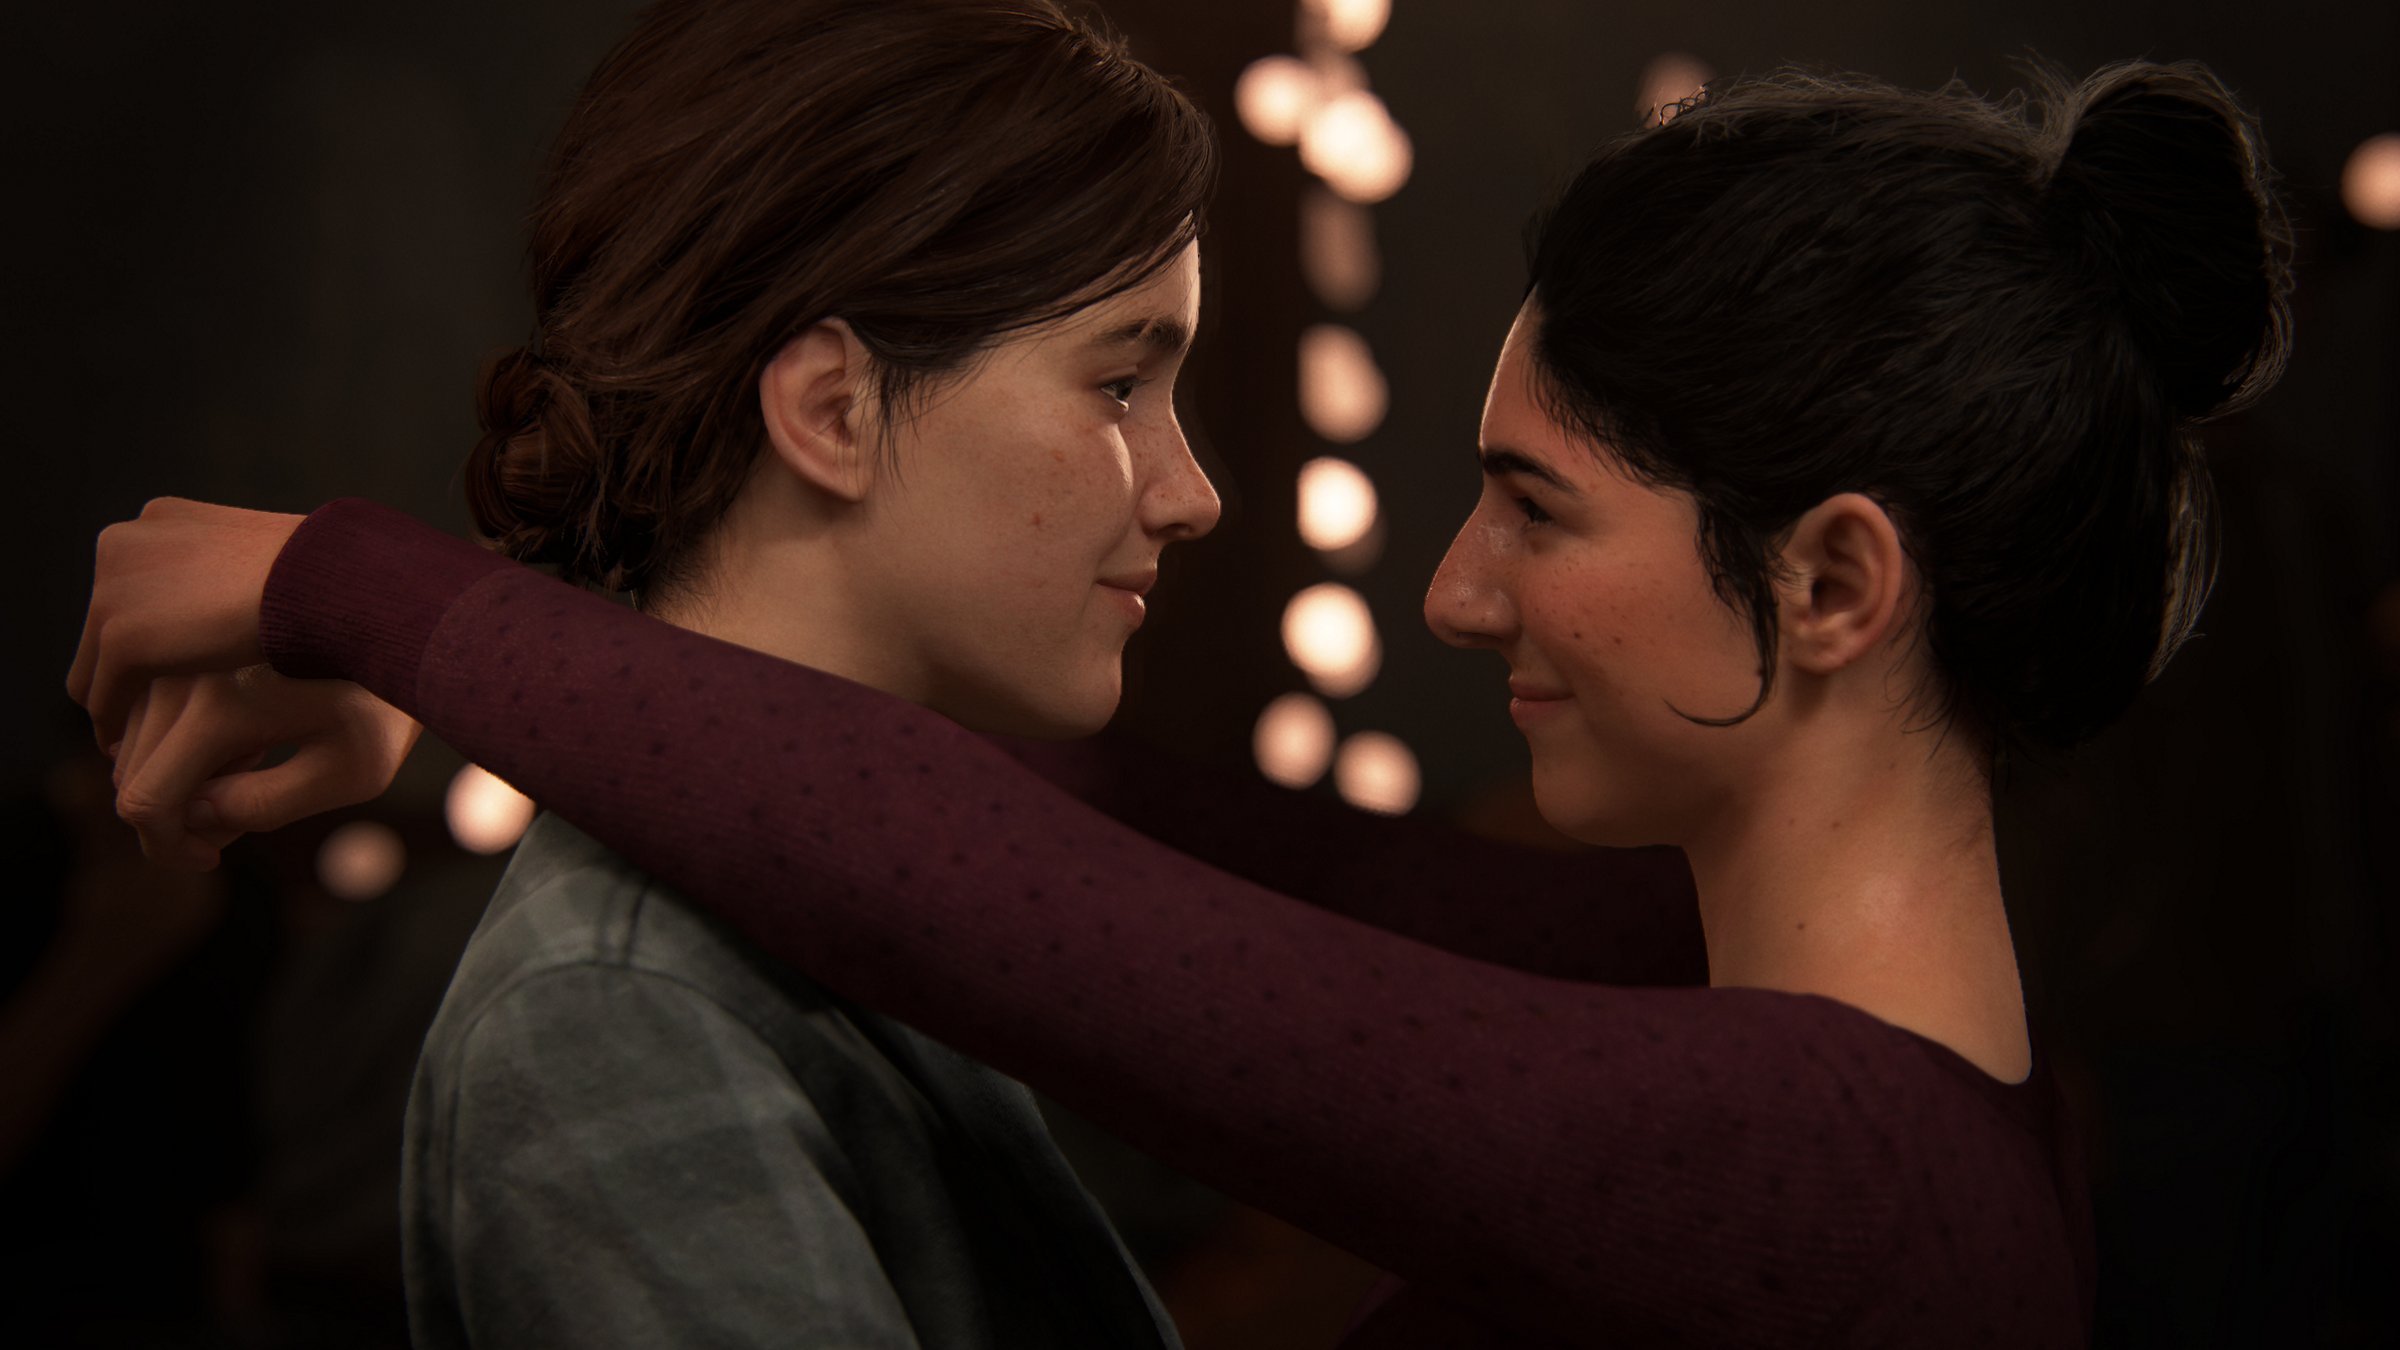 Ellie and Dina share a dance at the party